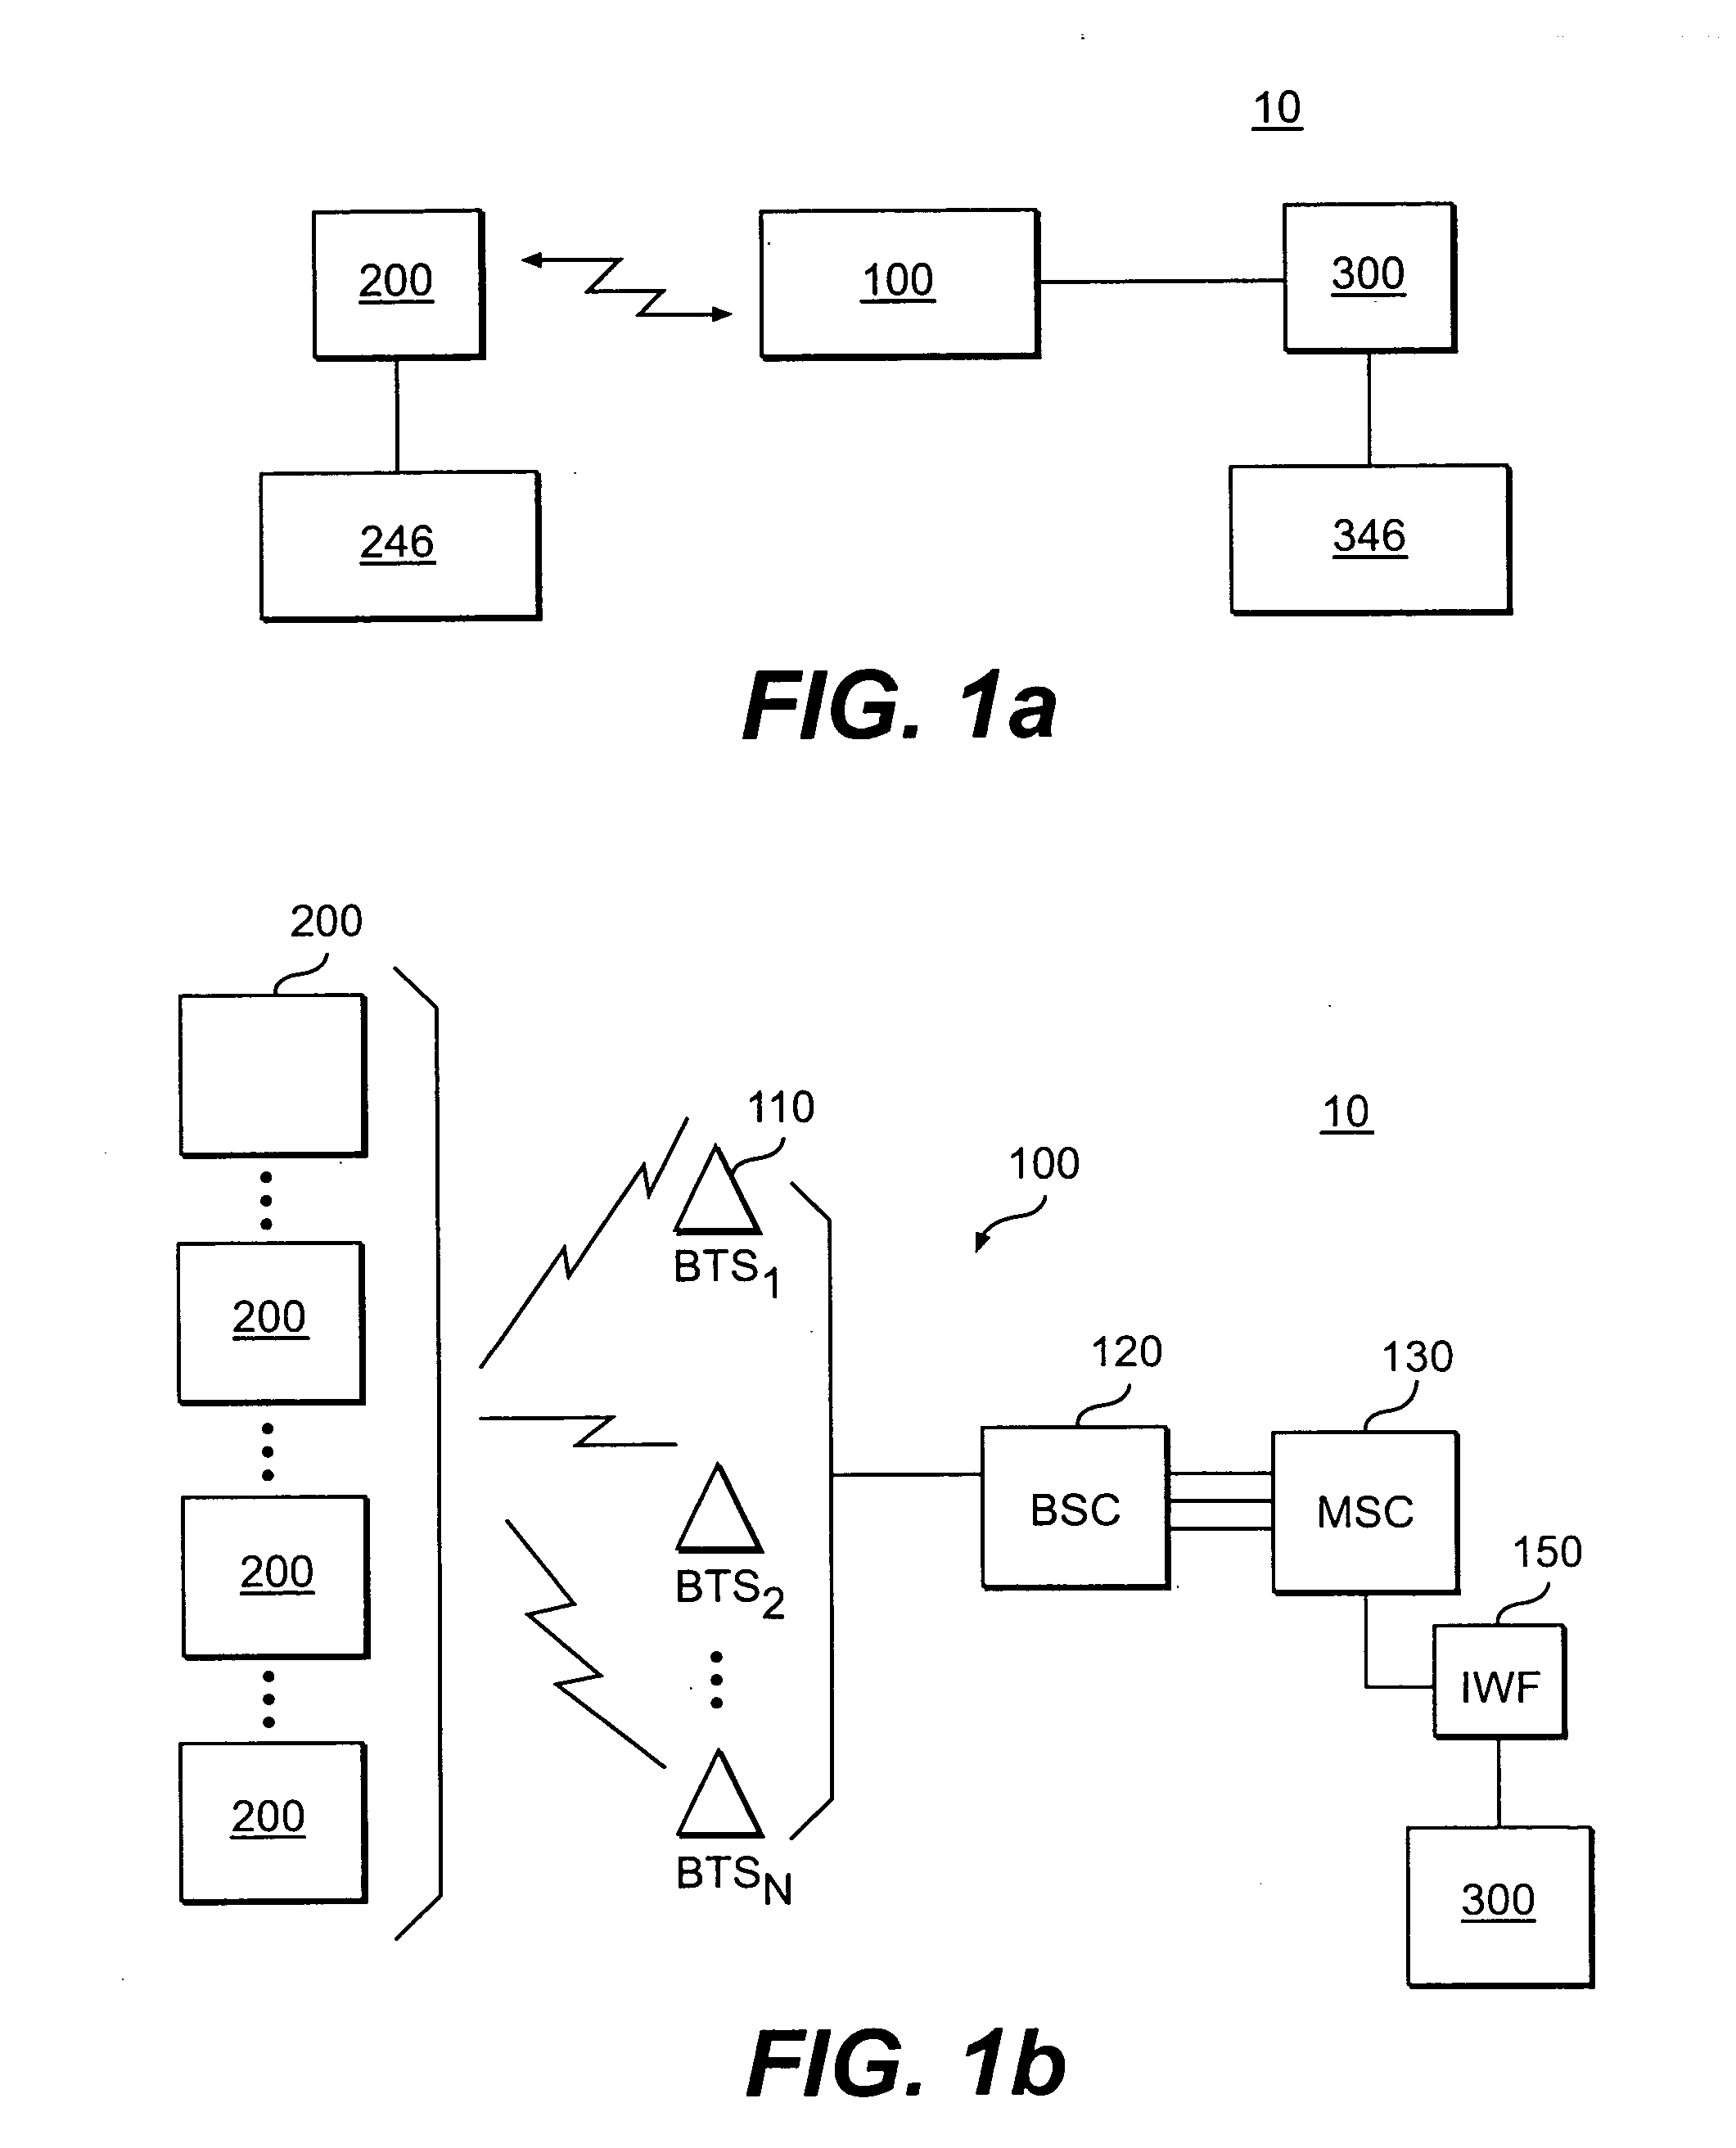 Method and system for improving the efficiency of state information transfer over a wireless communications network